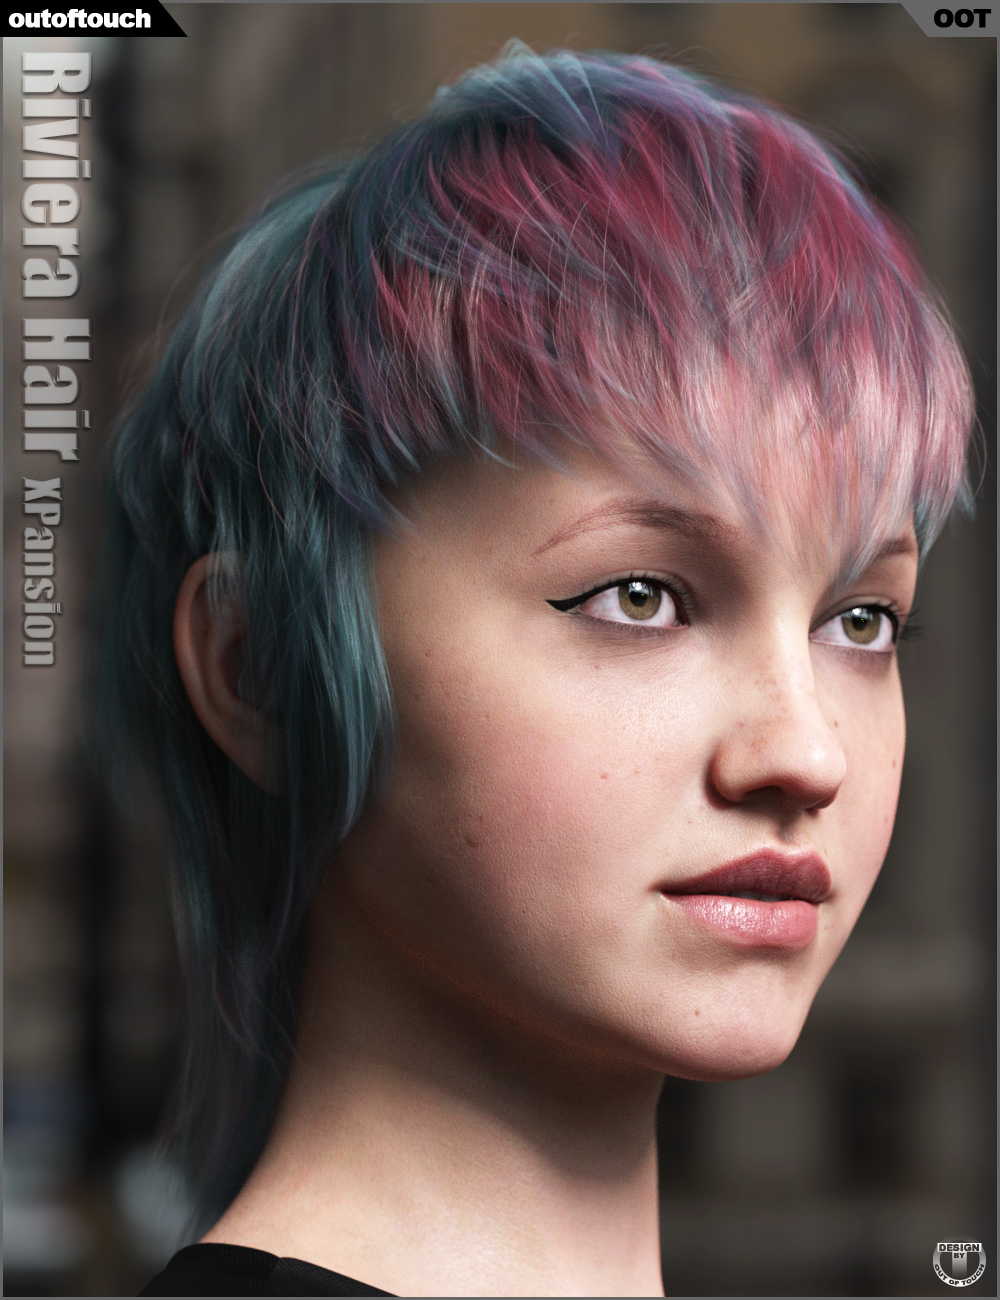 OOT Hairblending 2.0 Texture XPansion for Riviera Hair by: outoftouch, 3D Models by Daz 3D